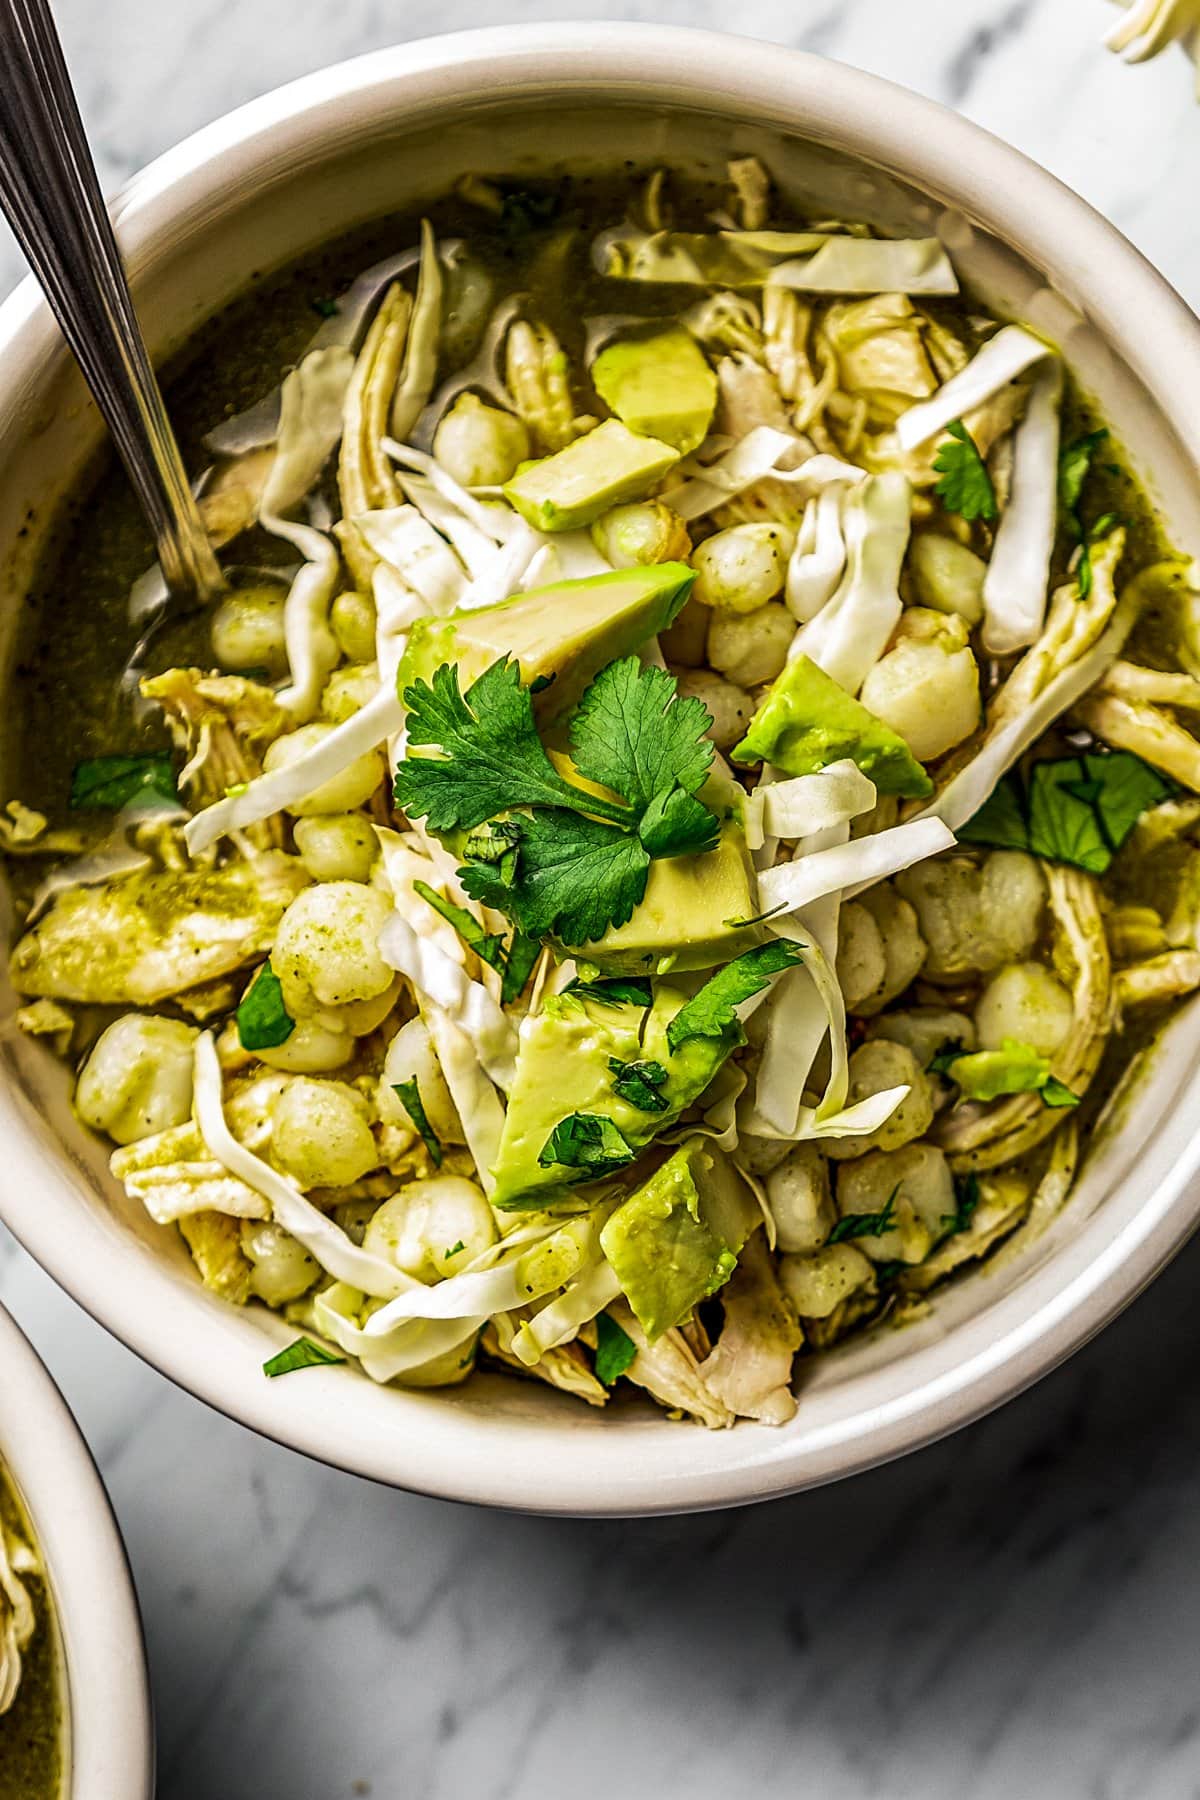 close up of chicken pozole verde served in a bowl and garnished with shredded cabbage, avocado slices, and fresh cilantro.